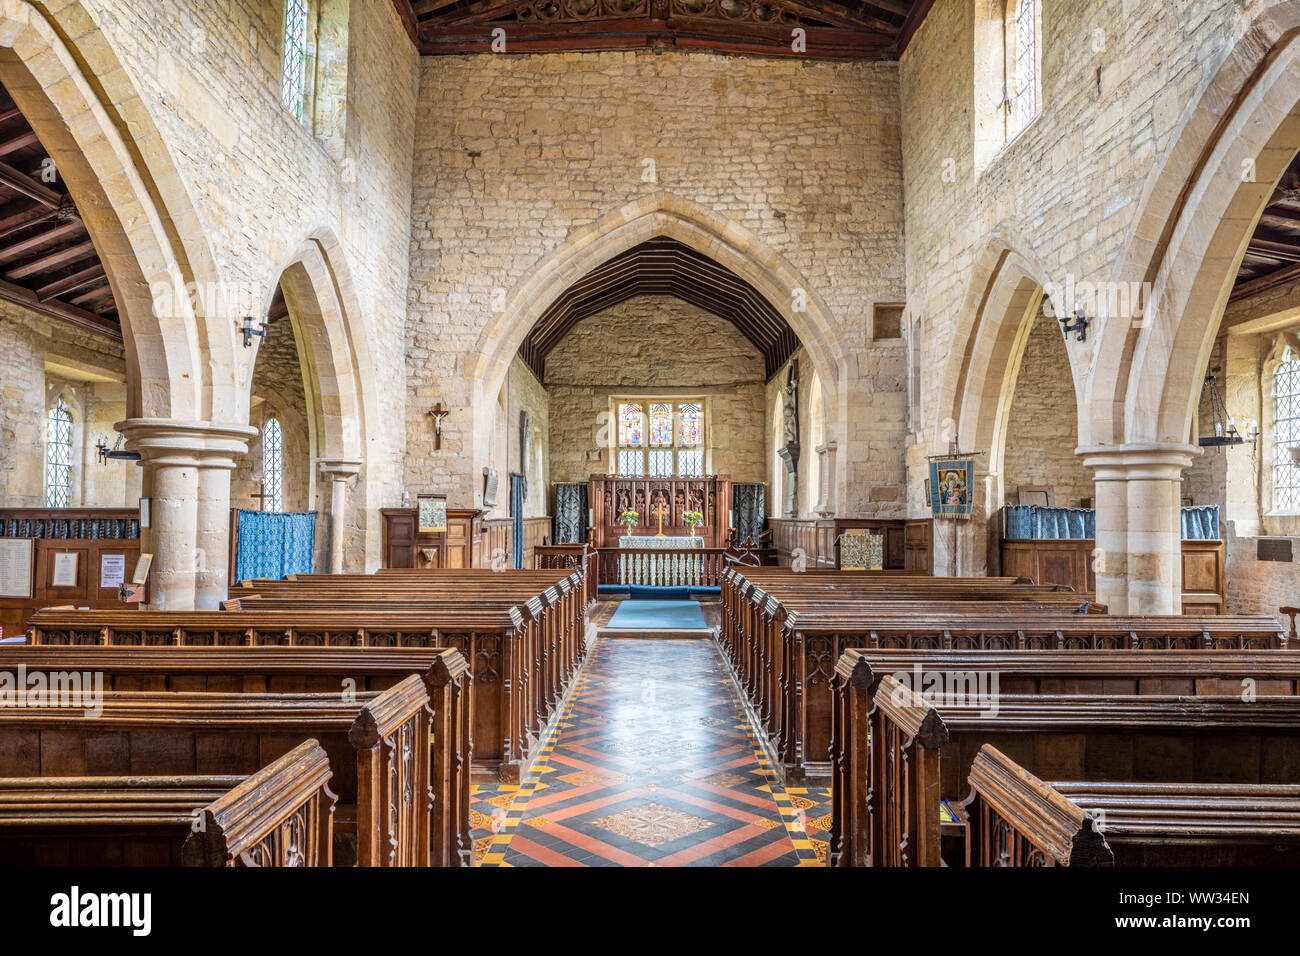 The interior of the church of St Michael in the Cotswold village of Buckland, Gloucestershire UK Stock Photo